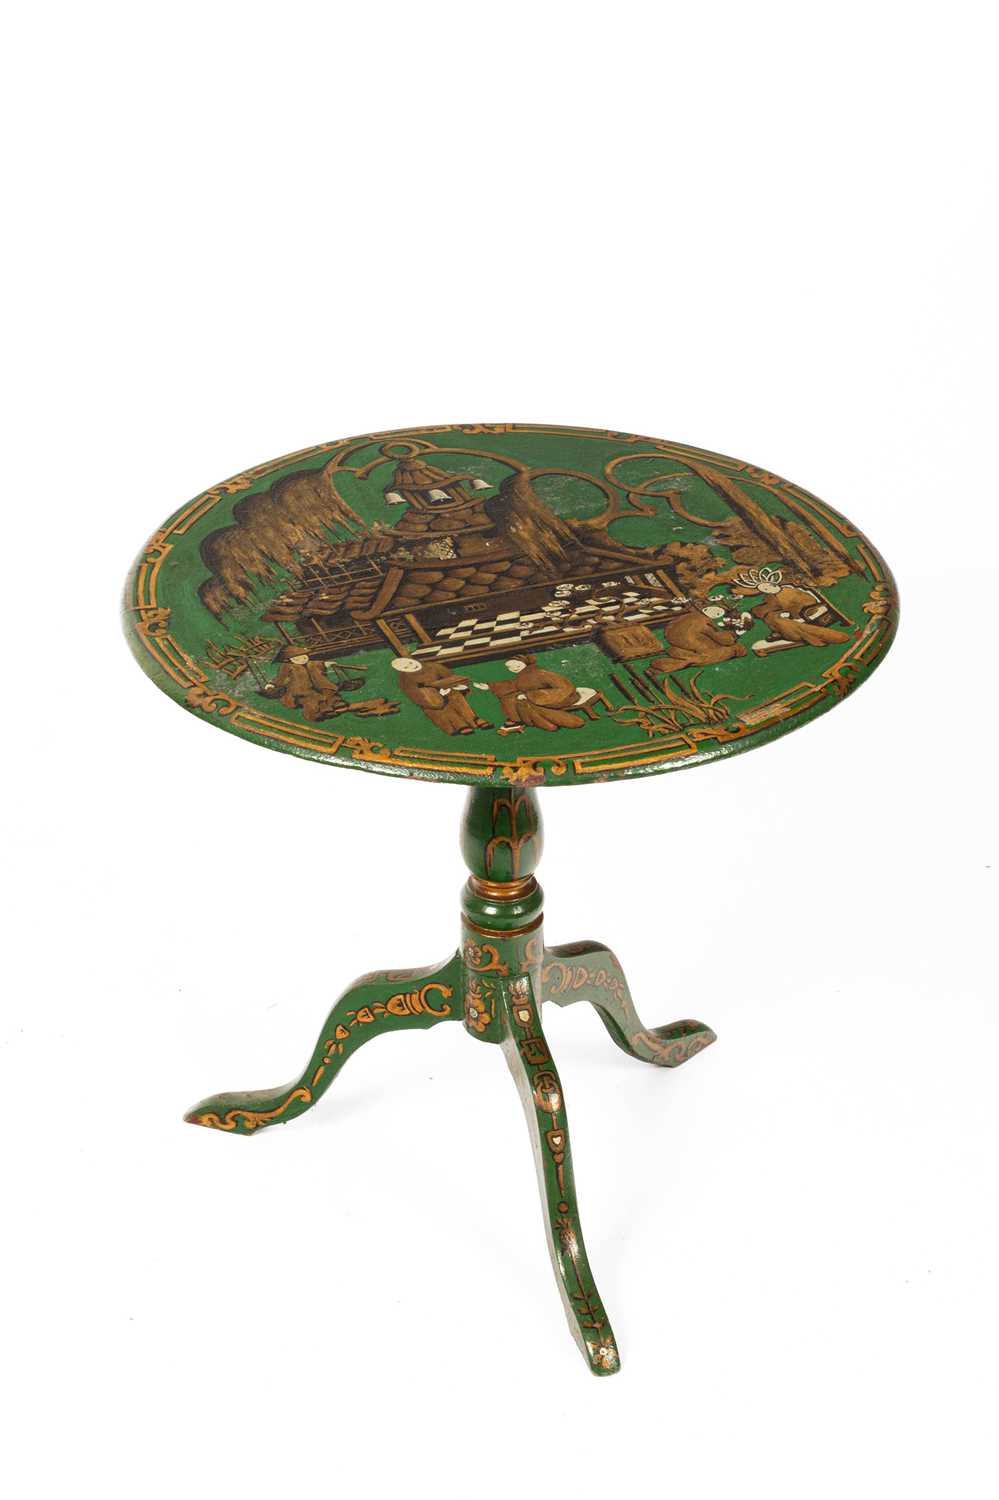 A green painted Chinoiserie tripod table